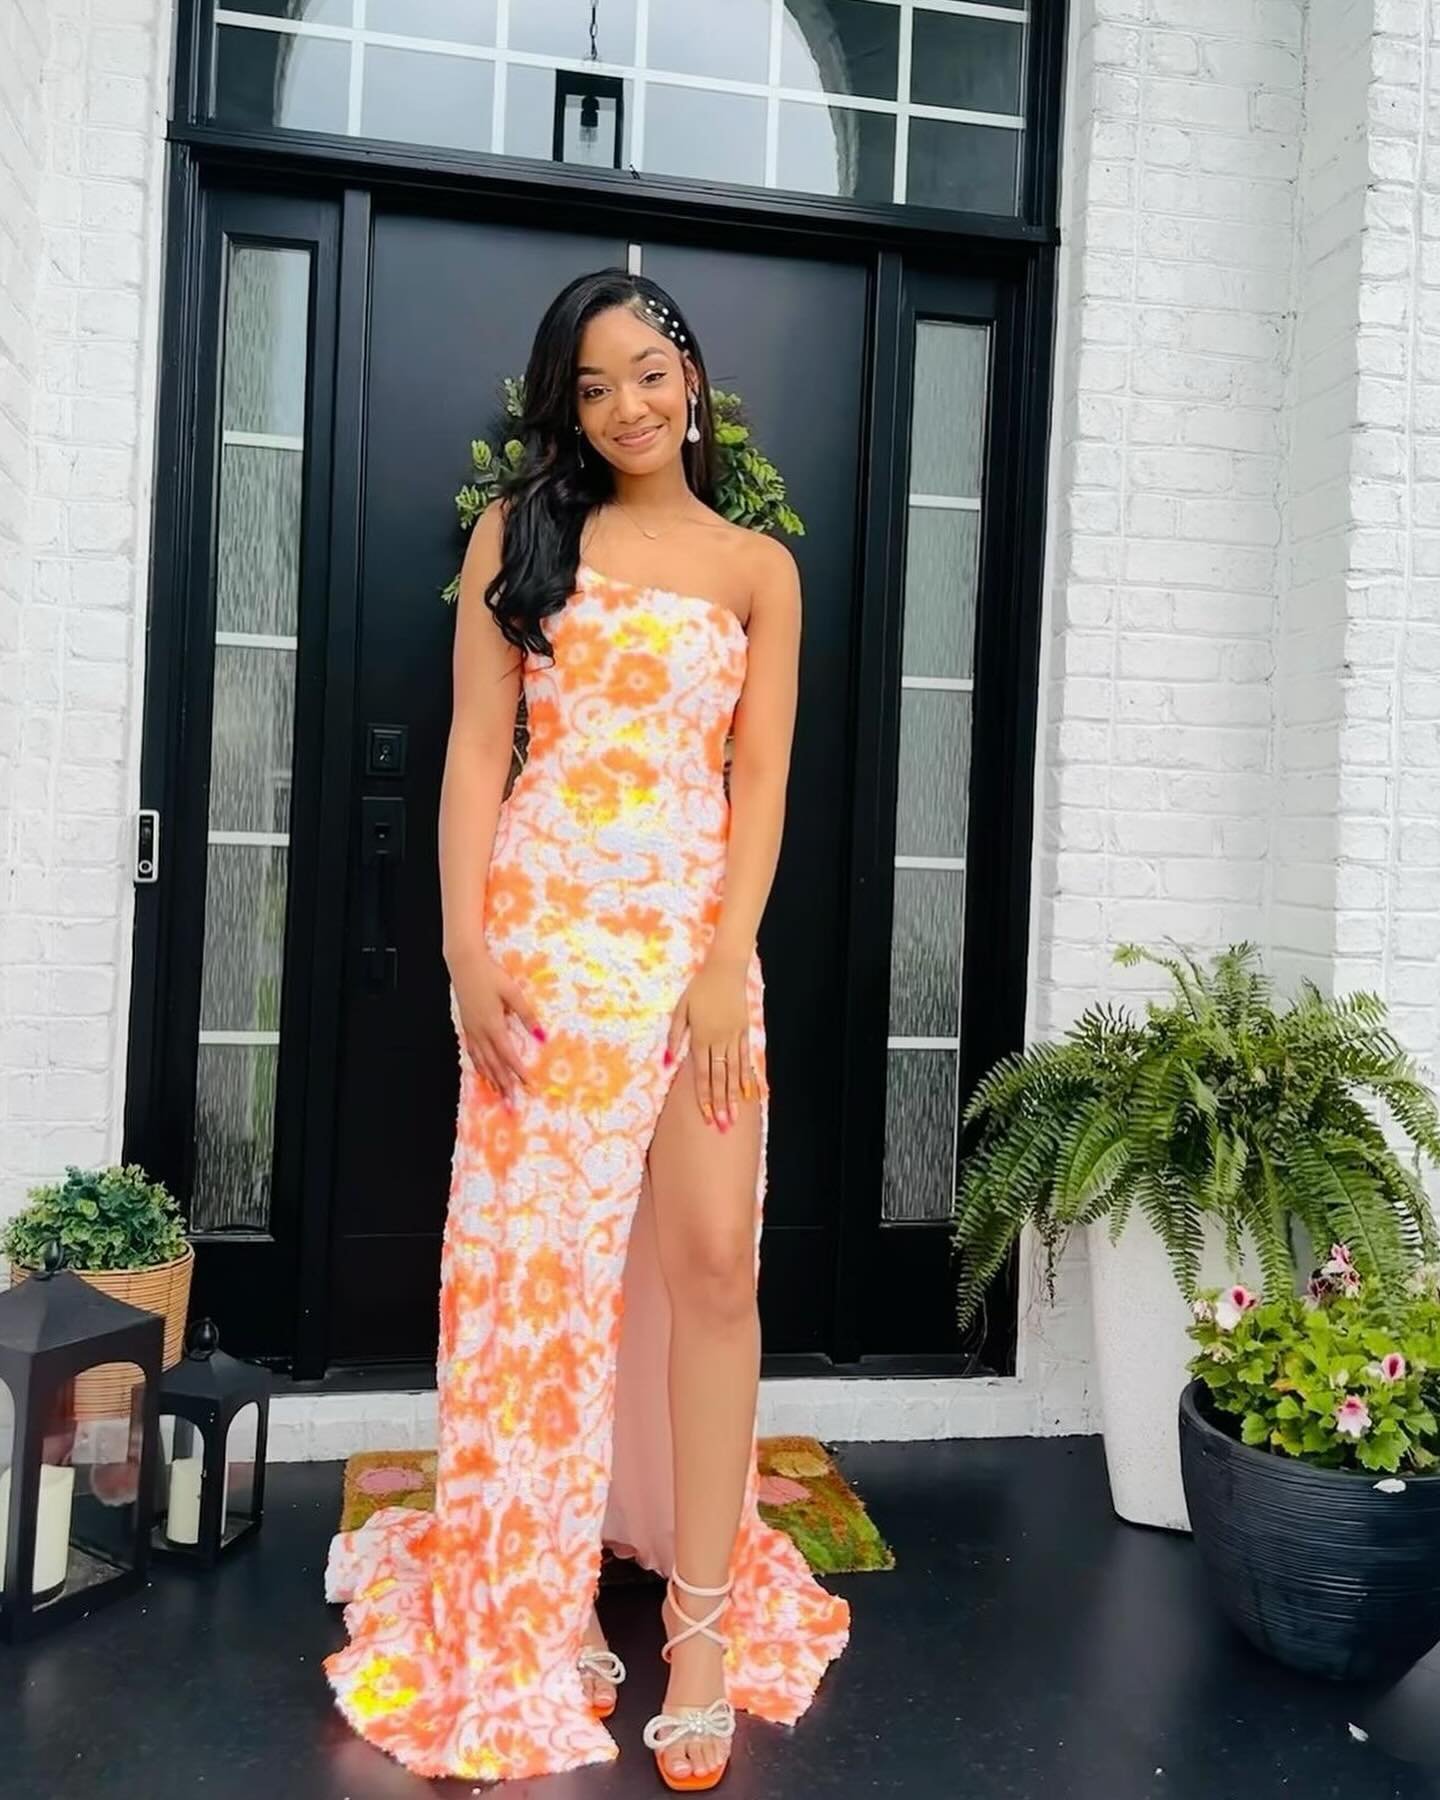 &ldquo;Life is a canvas; paint it with the colors of your passions and dreams.&rdquo; ✨ We love seeing our beautiful #agirltoremember beauties dressed up for prom, but we are even more excited to see how they change our world! 🩷
.
.
#aatrnc #agirlto